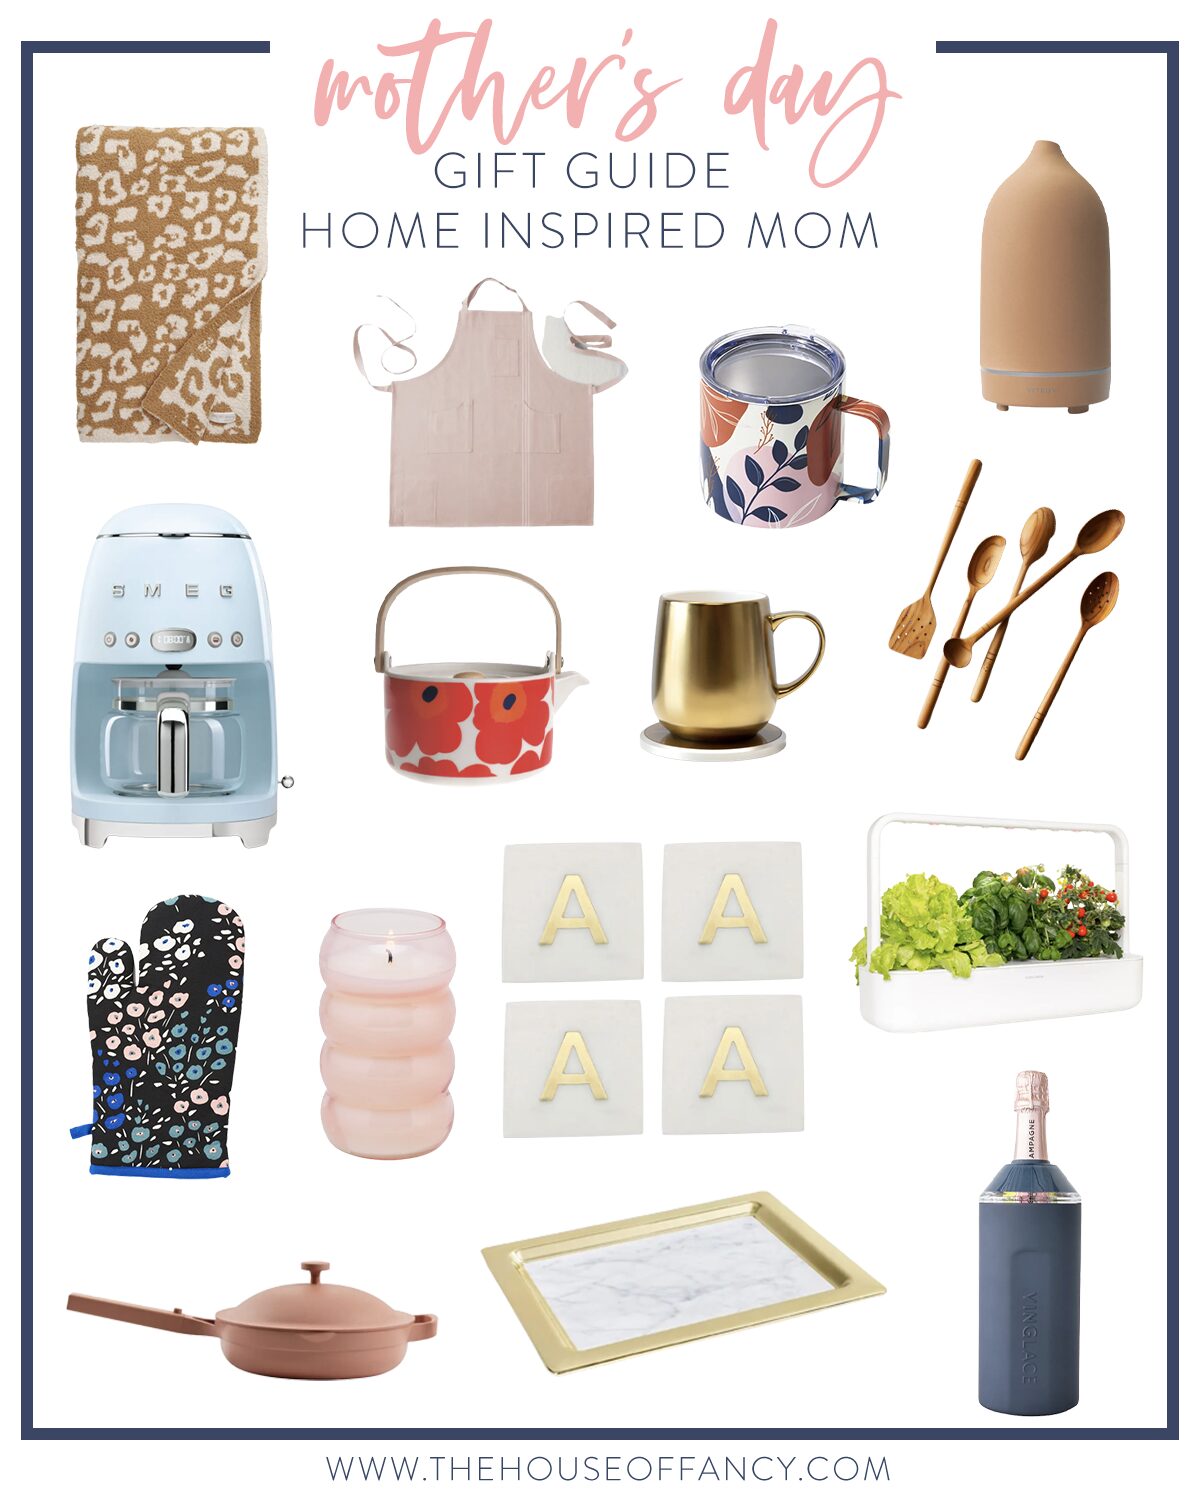 Mother's Day Gift Ideas by popular Houston life and style blog, The House of Fancy: collage image of a leopard print bracelet, oven mit, Always pan, monogram coasters, coffee maker, apron, mug warmer, kitchen utensils, and gold serving tray. 